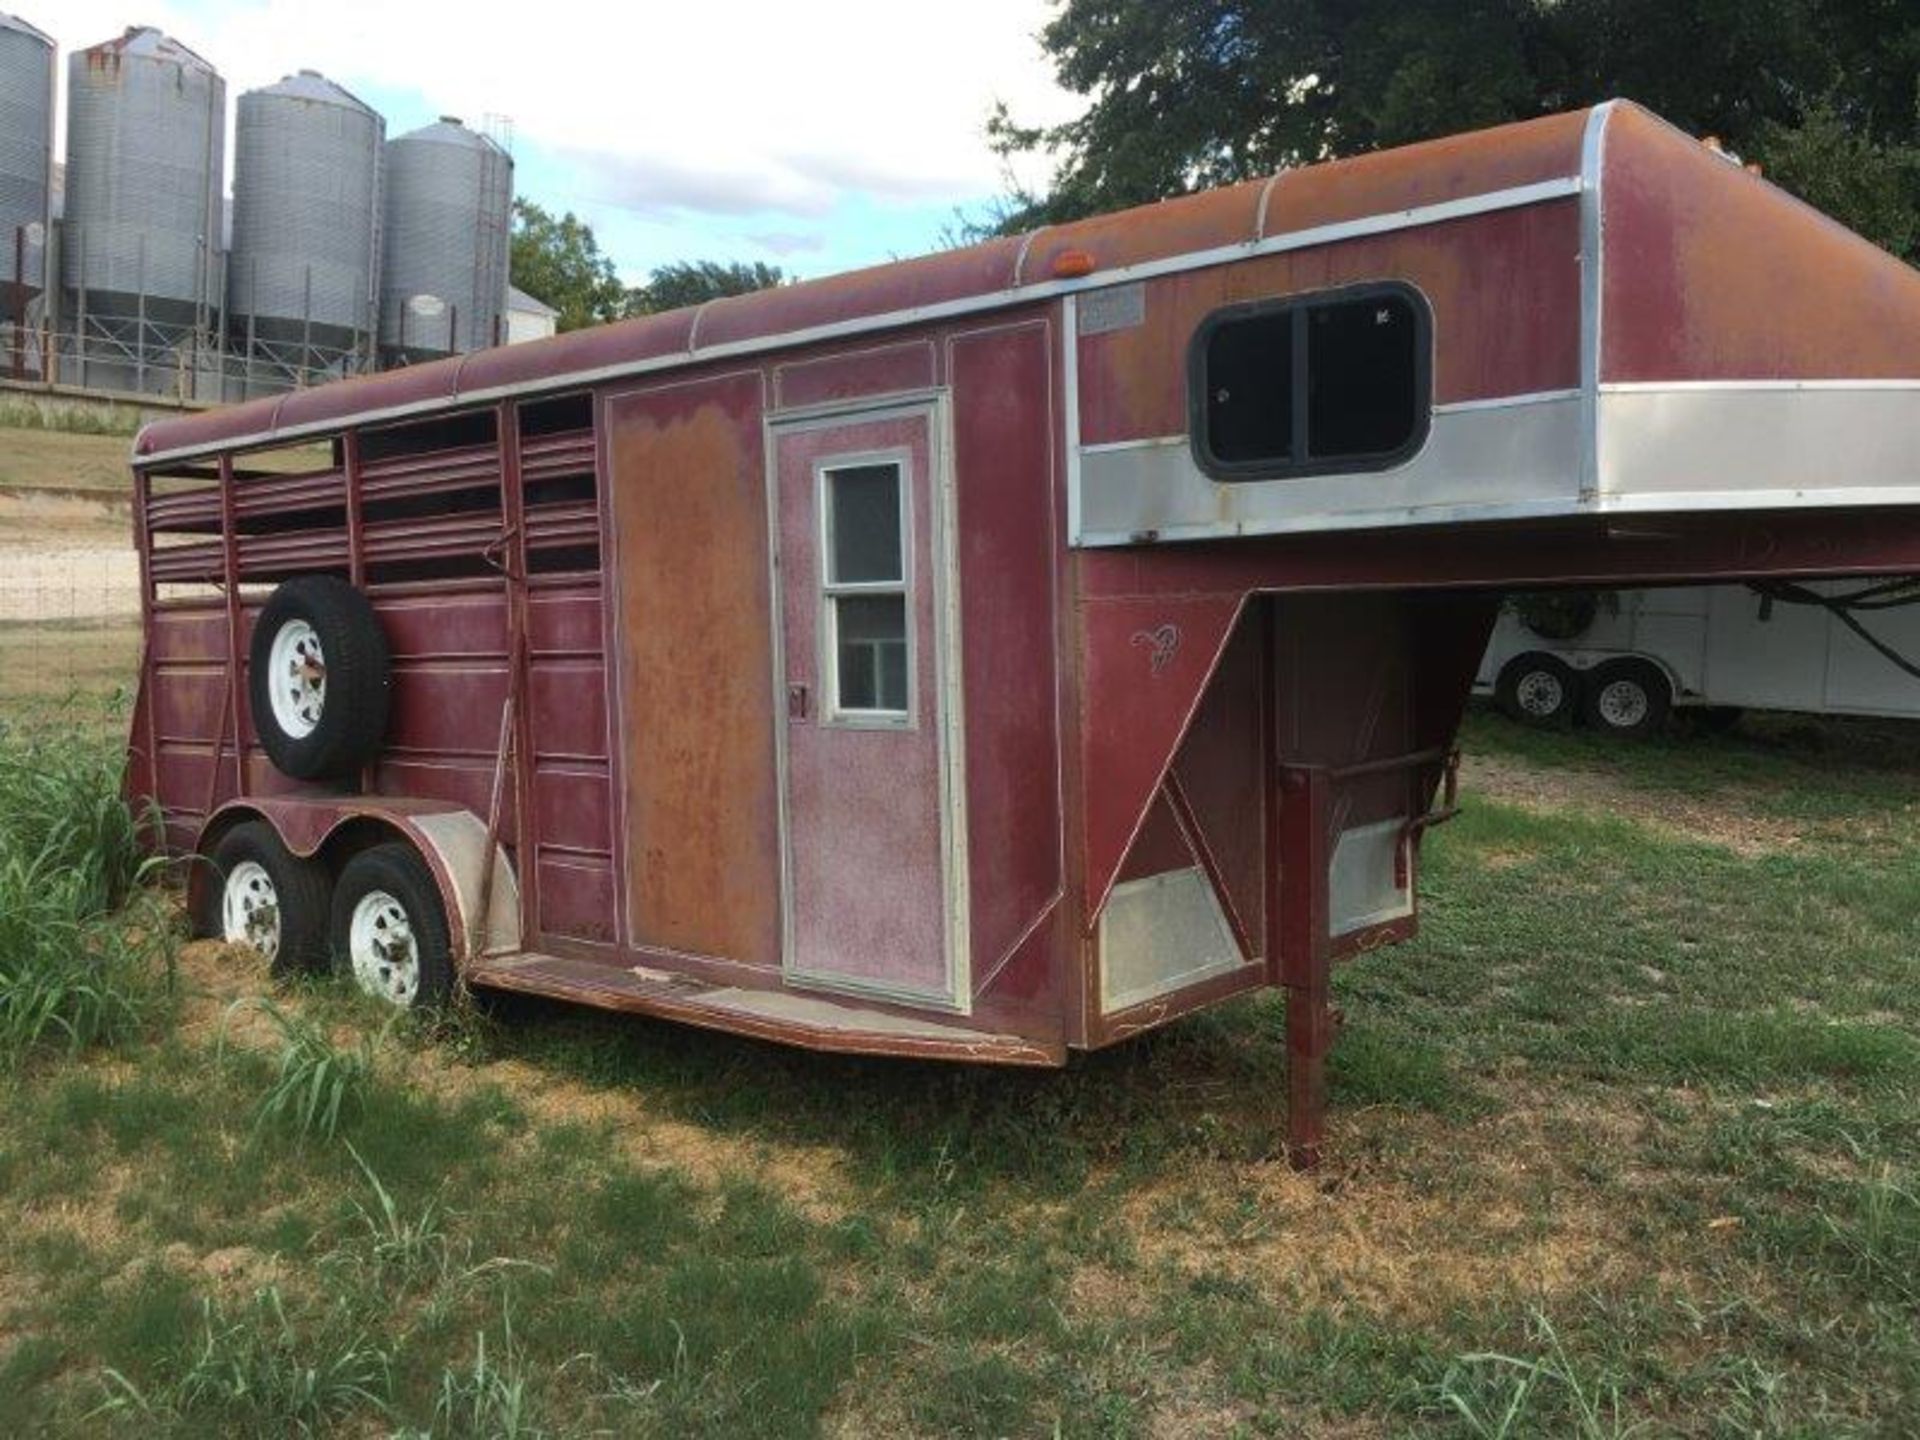 15' Ponderosa Steel Horse Trailer (LOCATION: 916 SOUTH 57TH ST, TEMPLE TX 76504) - Image 2 of 7